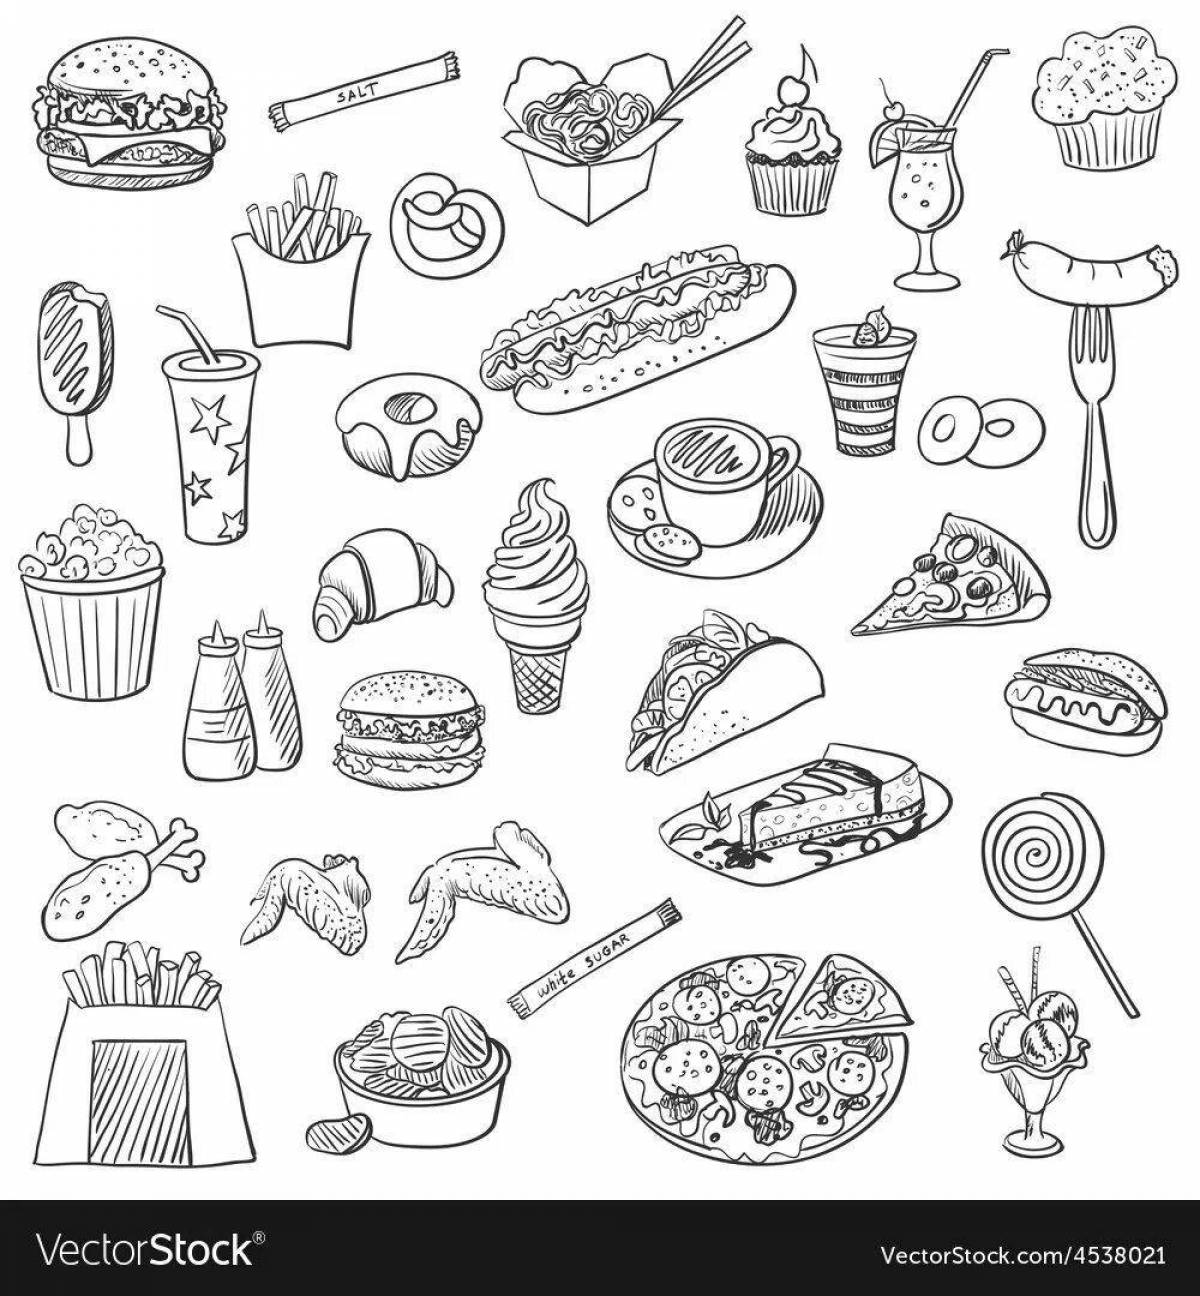 Charming ooty food coloring page